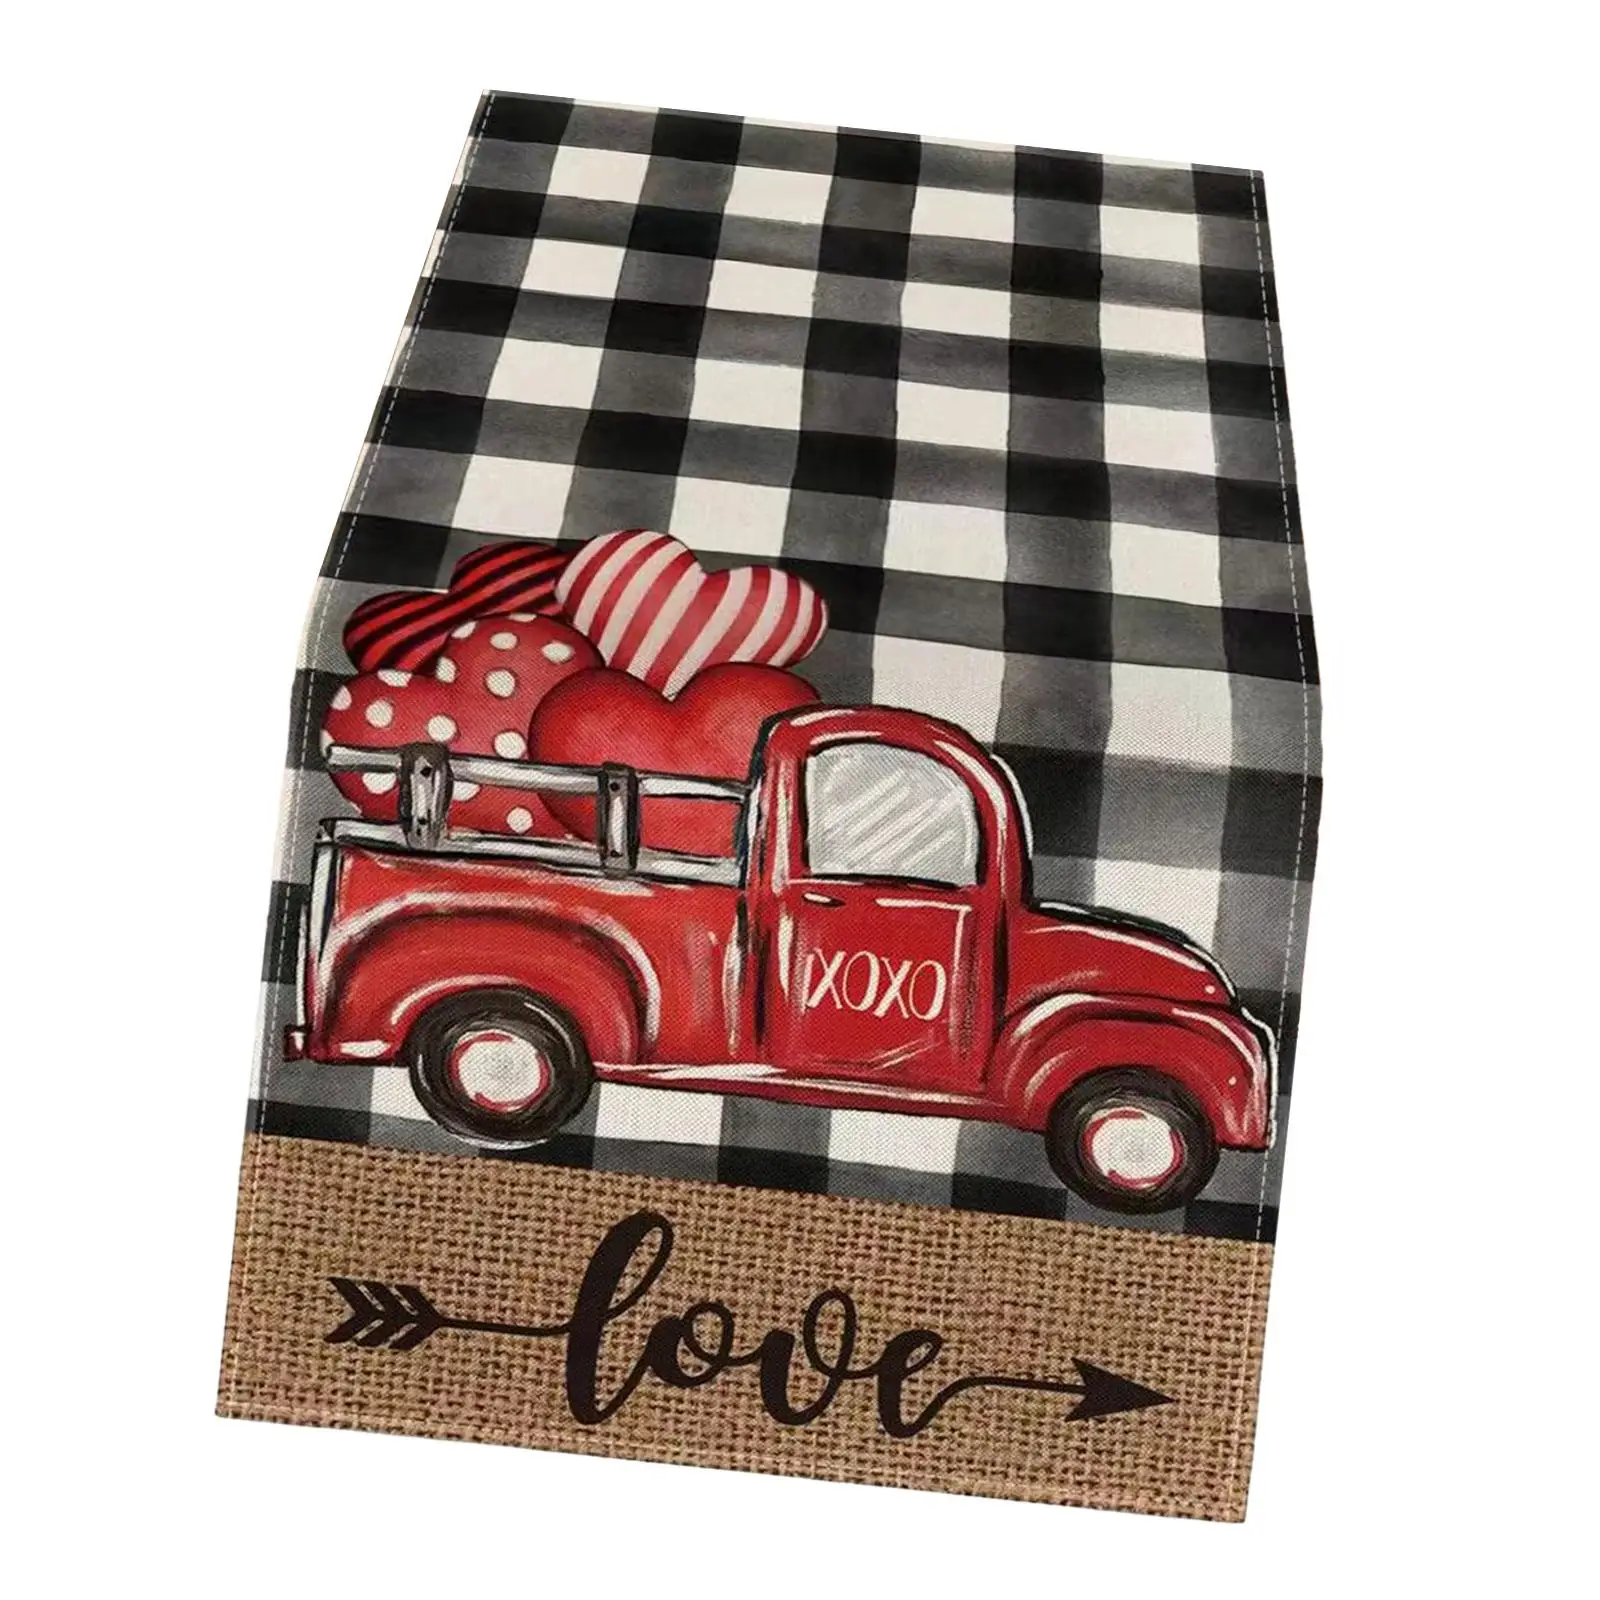 Valentine`s Day Table Runner Wear Resistant 13x72 inch Dining Table Decoration for Farmhouse Desk Cafe Anniversary Wedding